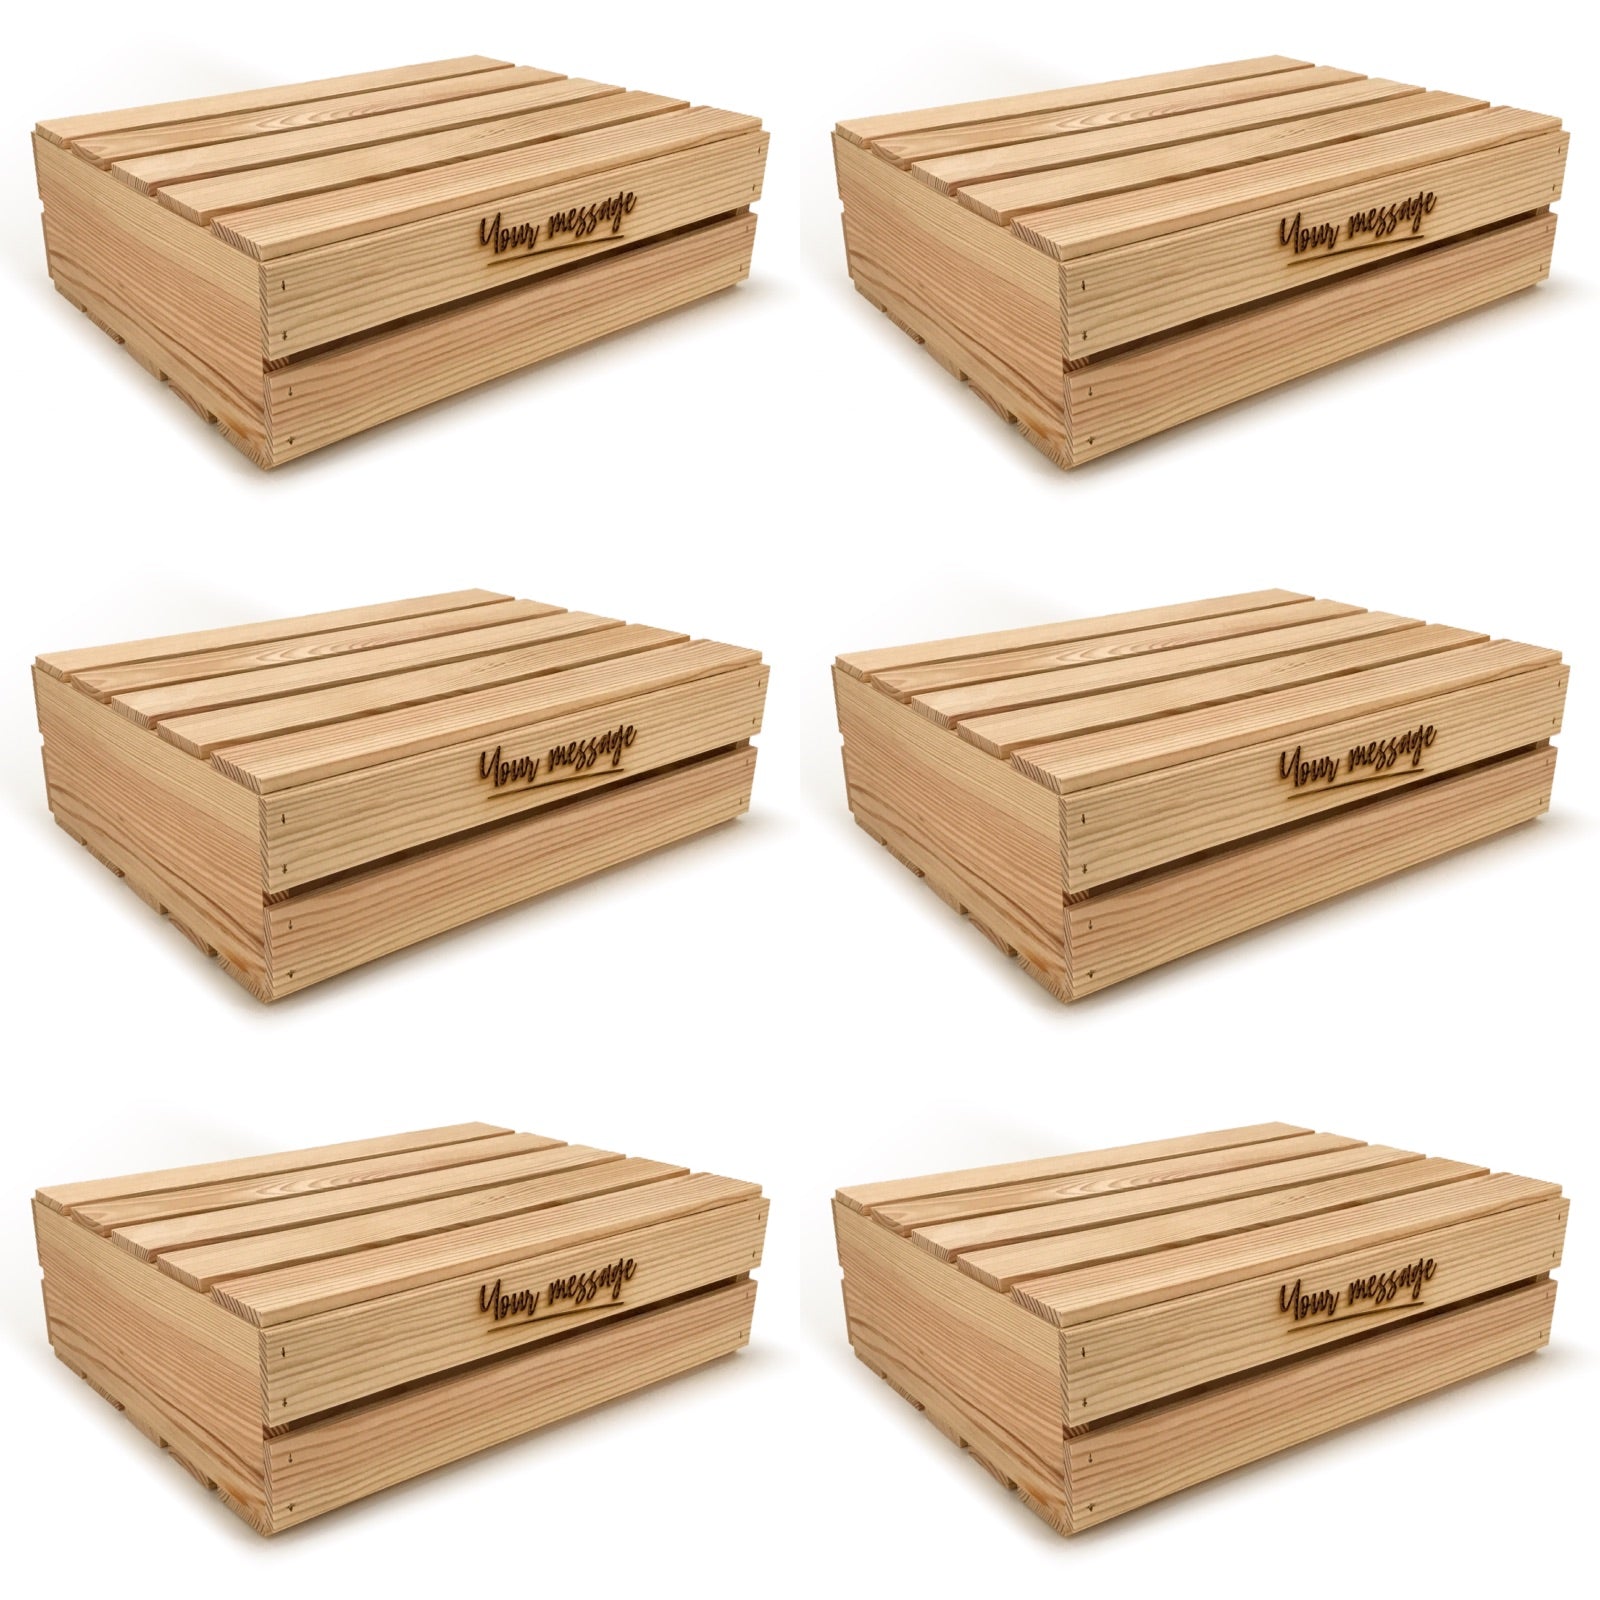 6 Small wooden crates with lid and custom message 18x14x5.25, 6-WS-18-14-5.25-ST-NW-LL, 12-WS-18-14-5.25-ST-NW-LL, 24-WS-18-14-5.25-ST-NW-LL, 48-WS-18-14-5.25-ST-NW-LL, 96-WS-18-14-5.25-ST-NW-LL